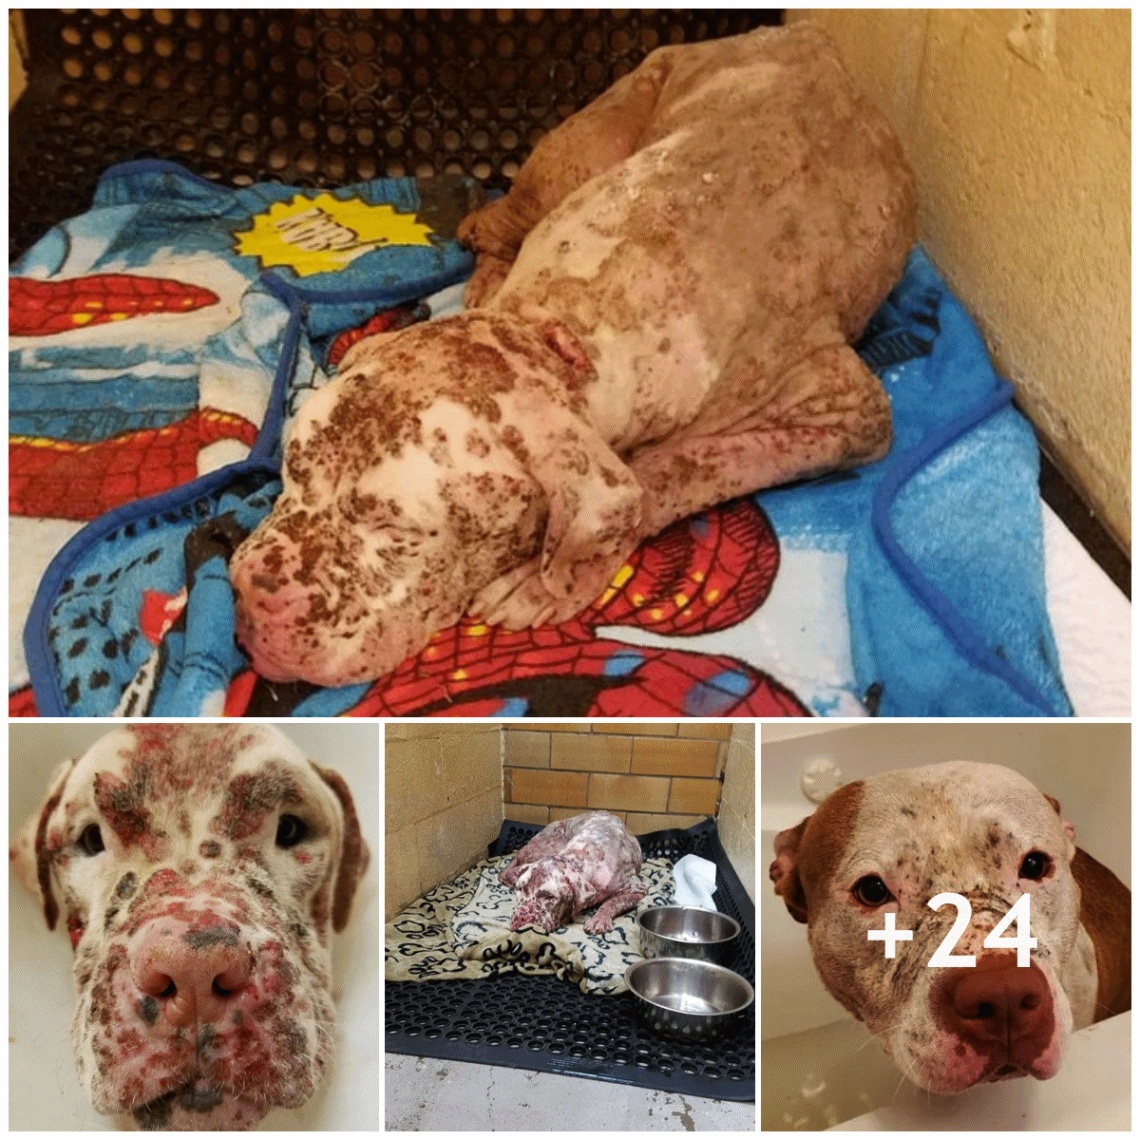 Regrettable! A dog was brutally attacked by an entire dog to the point of death, but after months of intensive treatment, he miraculously made a full recovery.